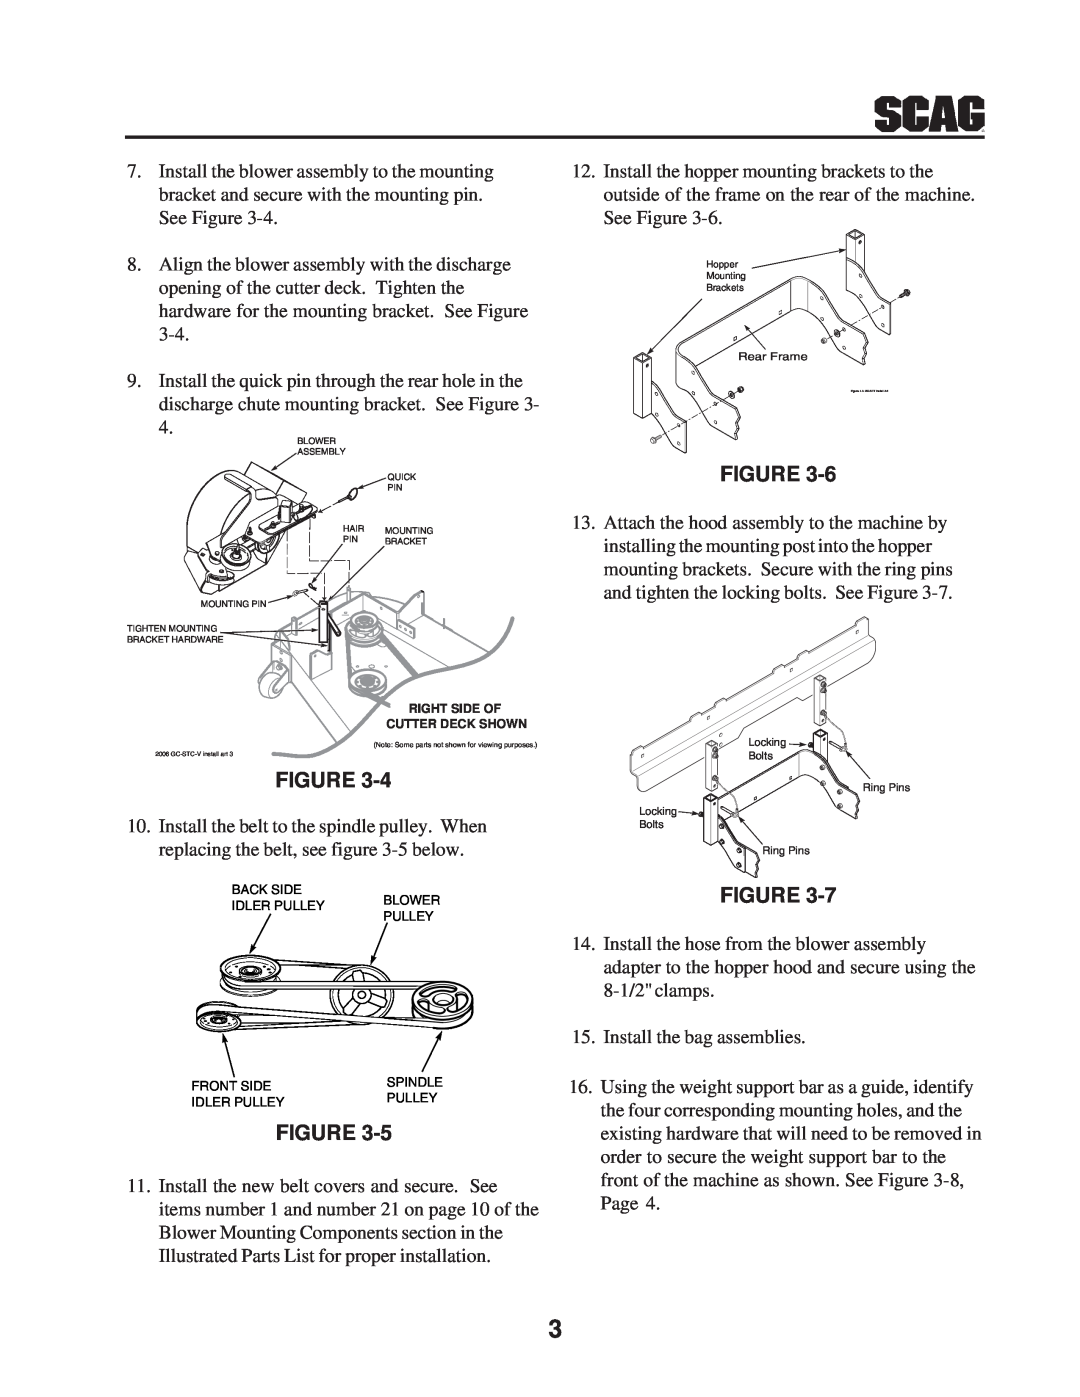 Scag Power Equipment GC-STWC-61V operating instructions Install the bag assemblies 